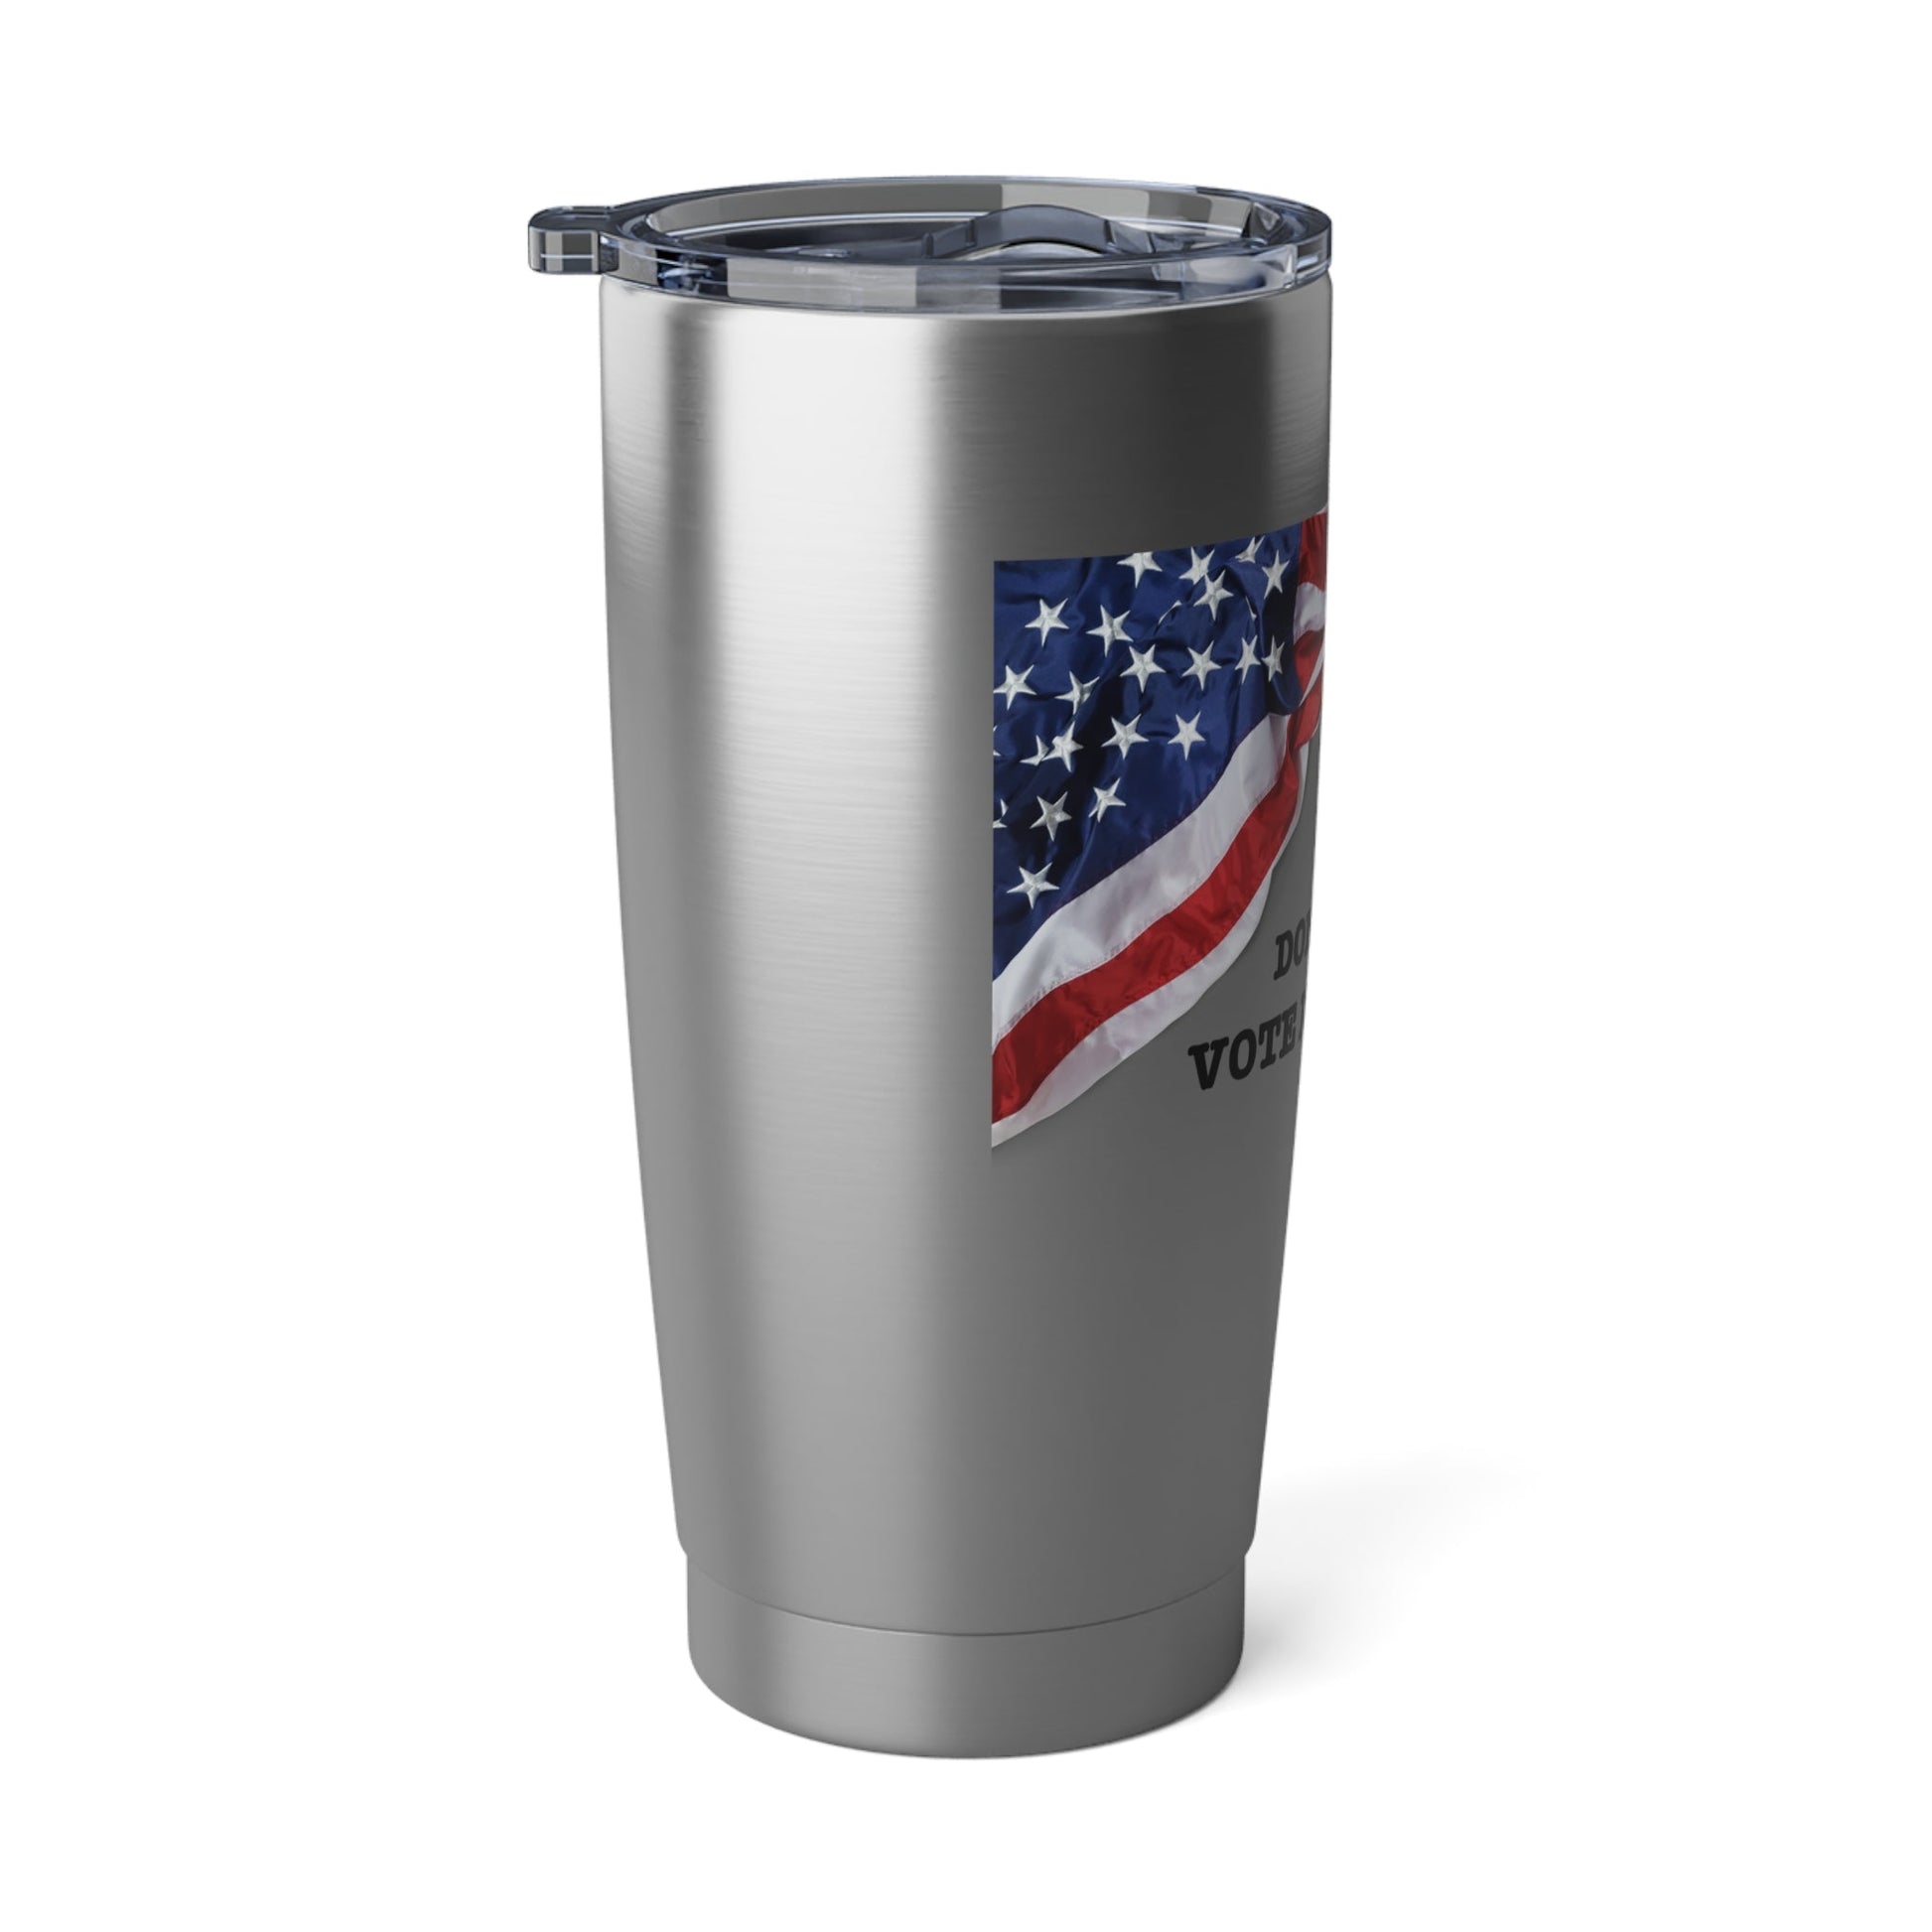 Get trendy with When I die don't let me vote Dumbercrat 20oz Tumbler - Mug available at Good Gift Company. Grab yours for $18 today!